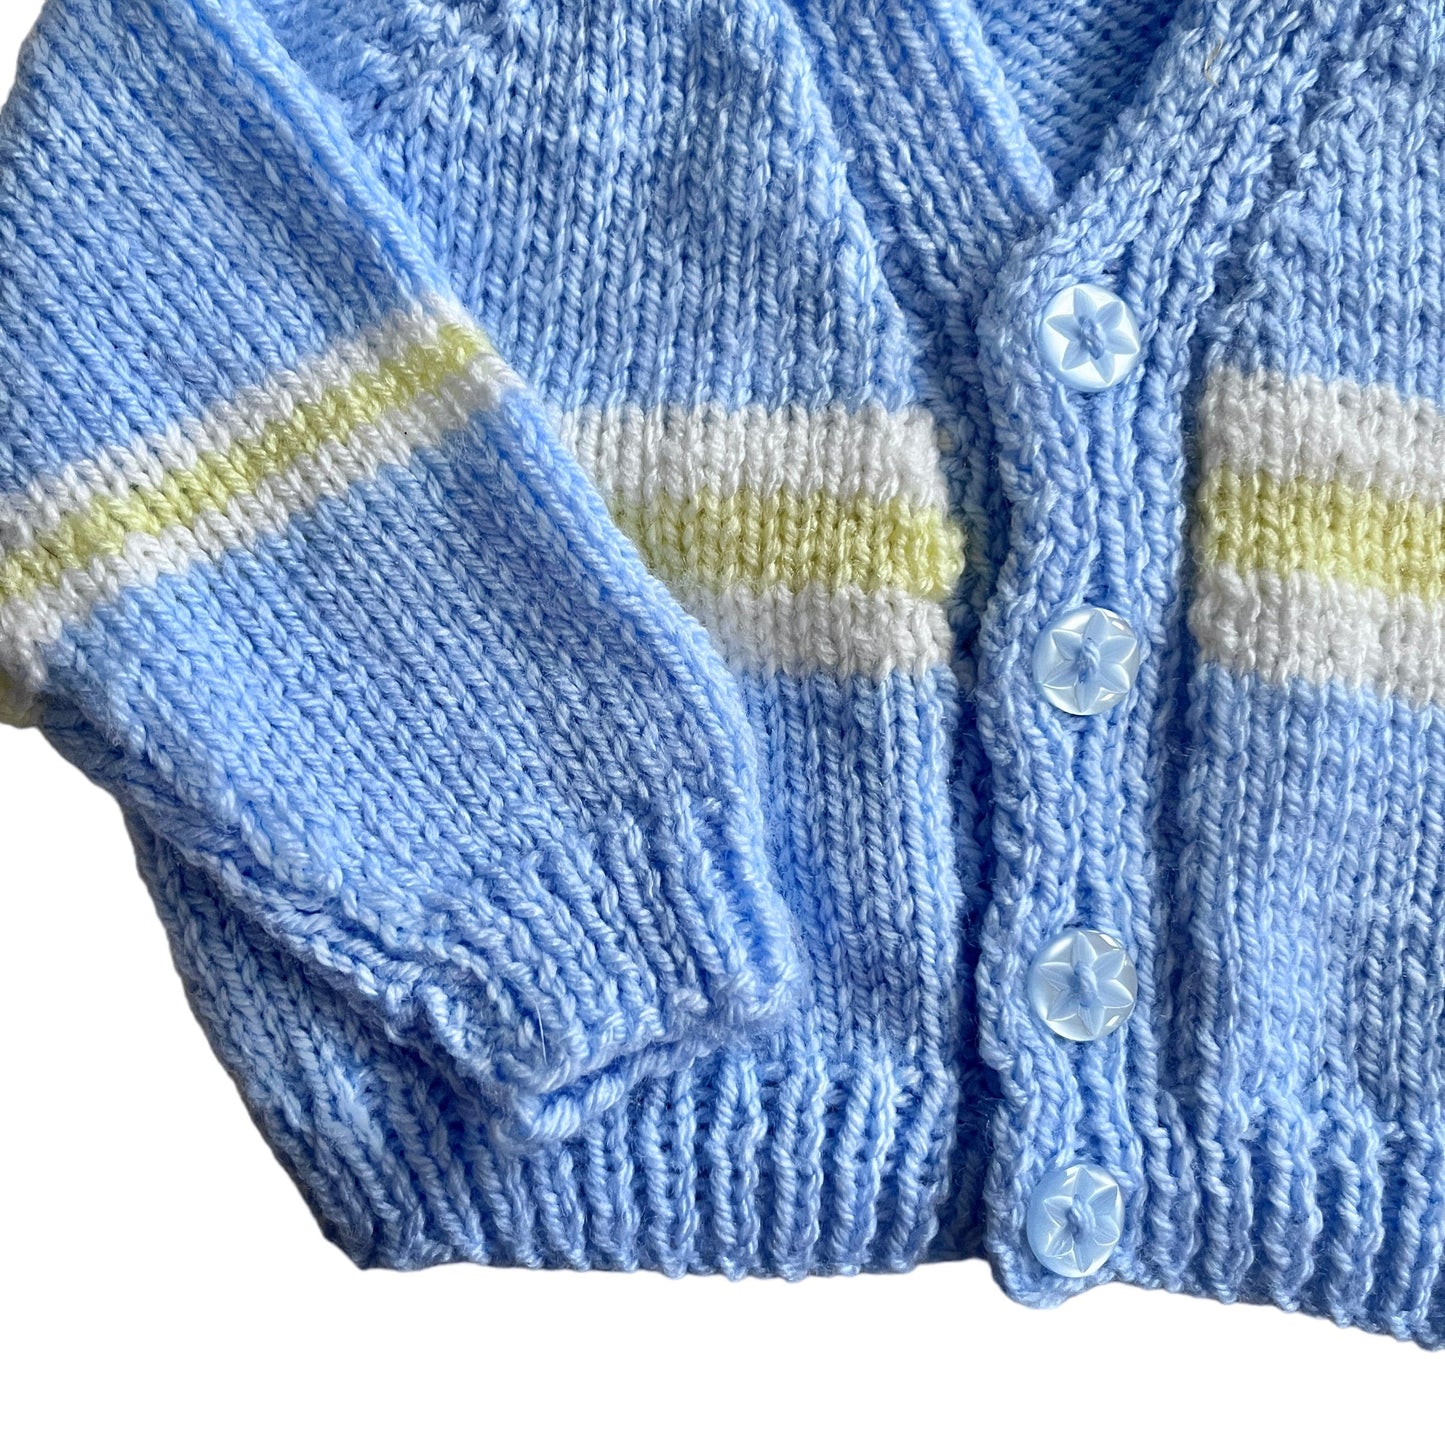 Vintage Yellow Knitted Cardigan 0-6 Months